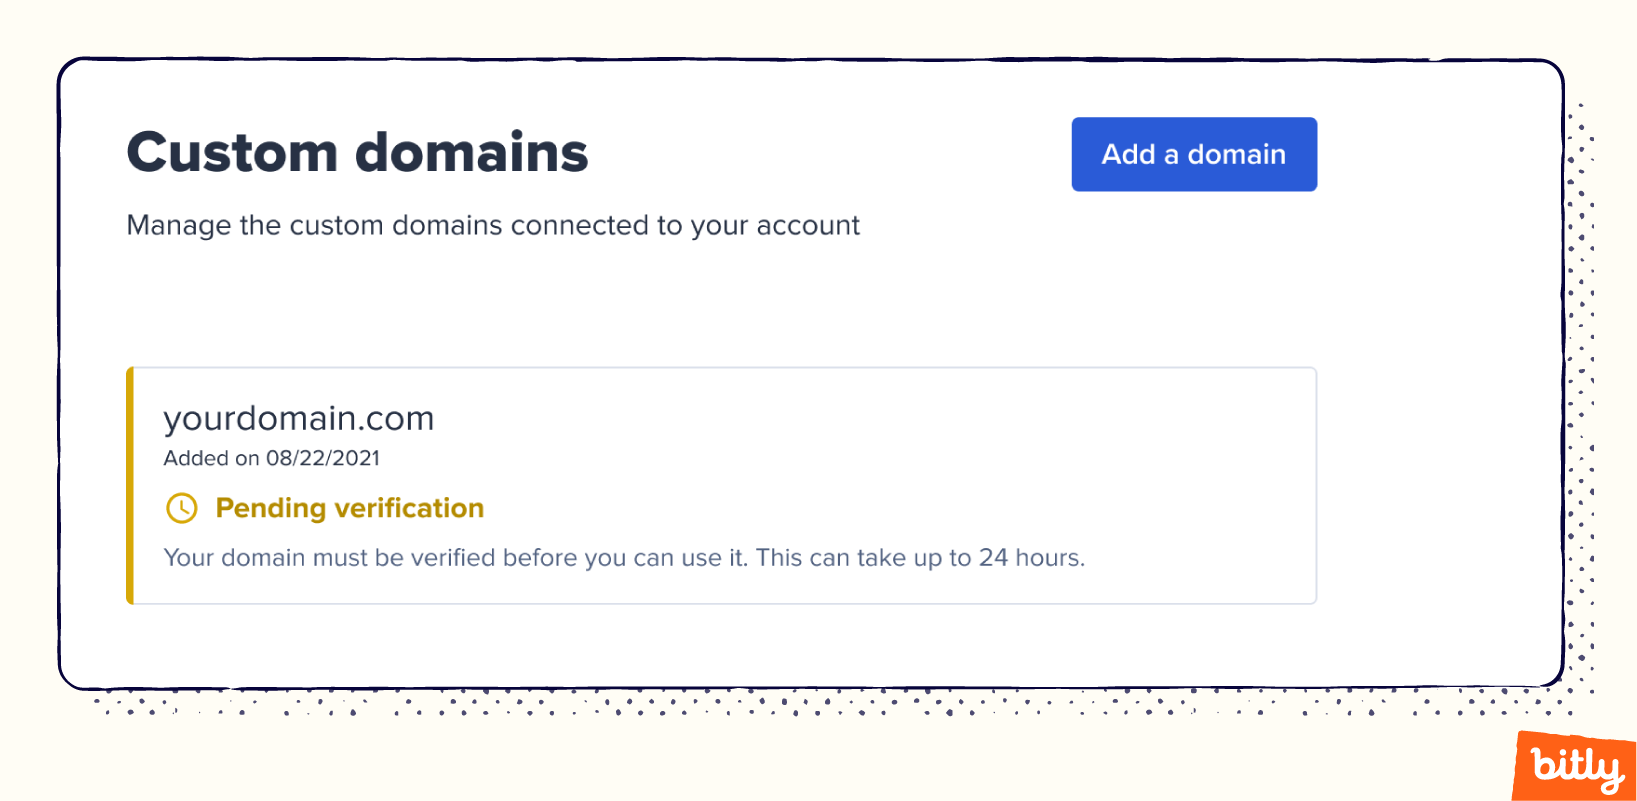 The verification status of a custom domain in Bitly.